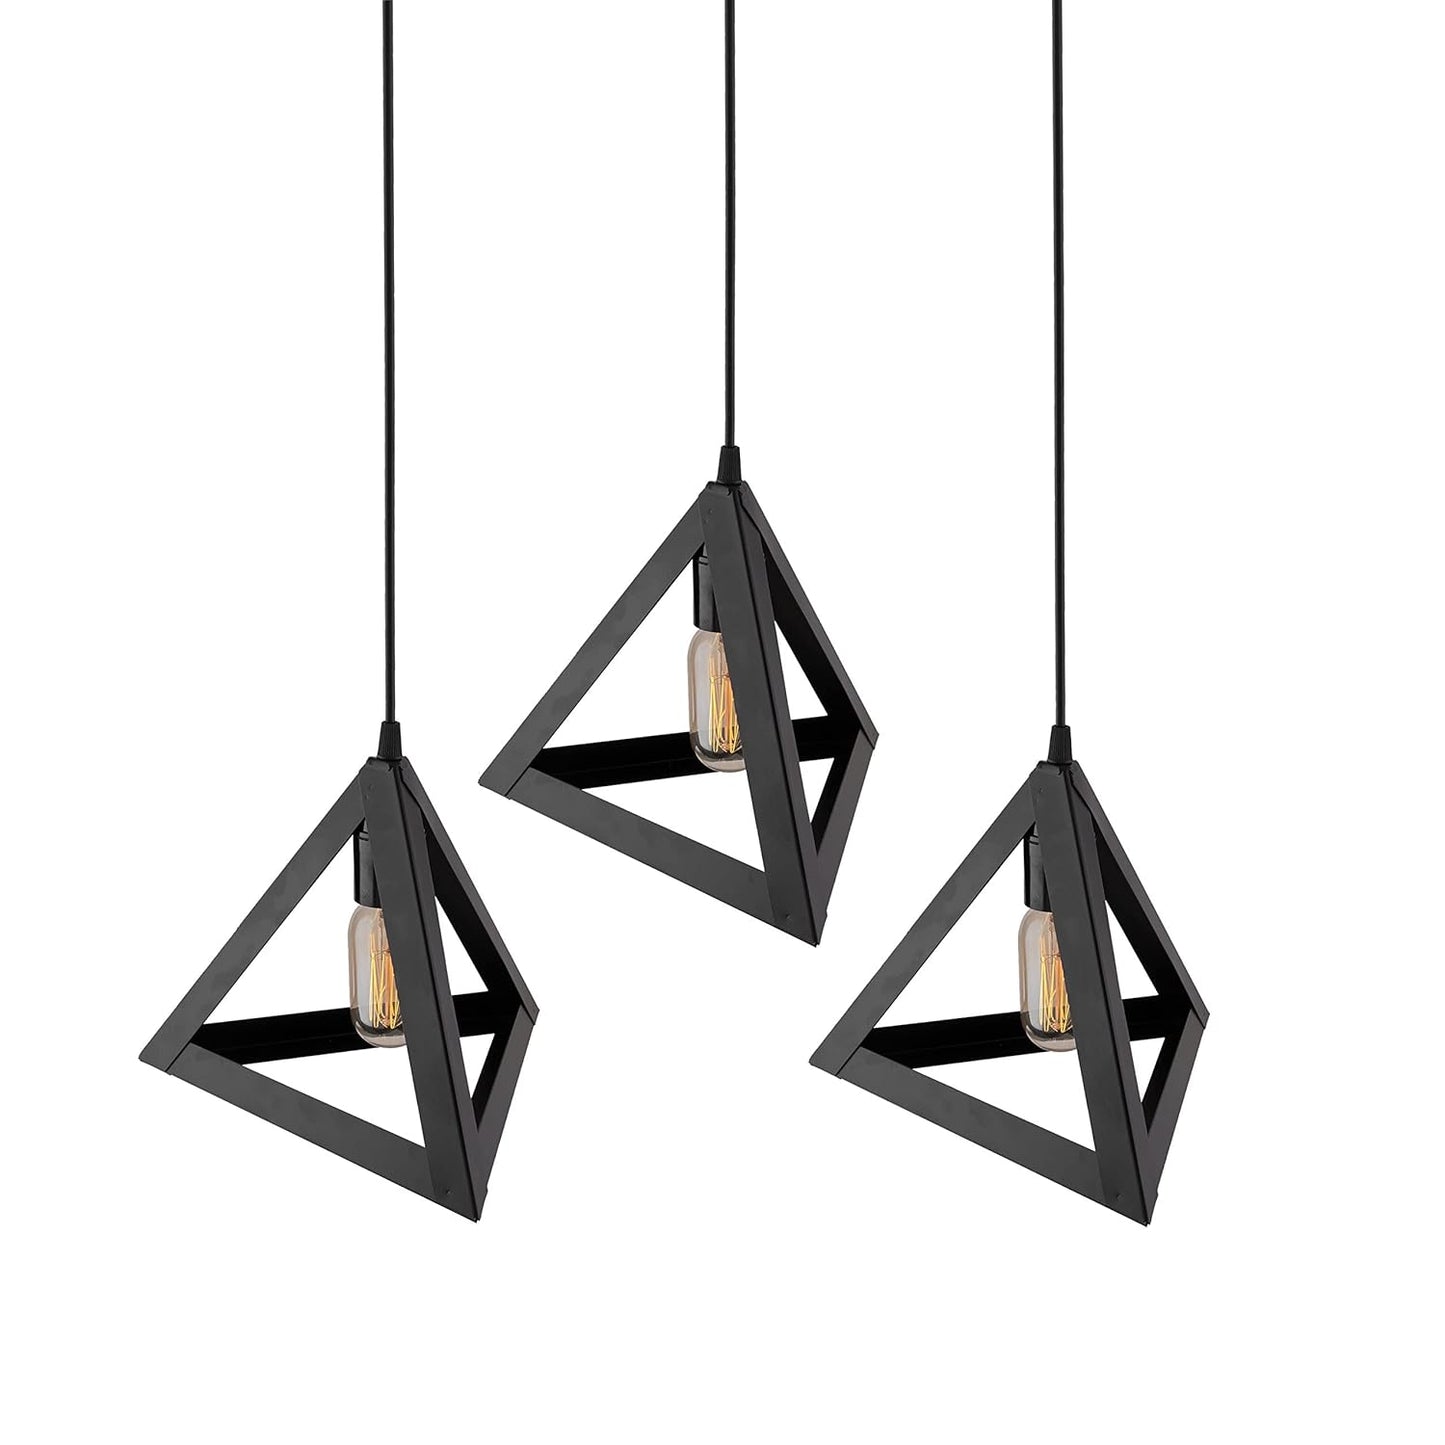 3 in 1 Triangle Celling Lamp